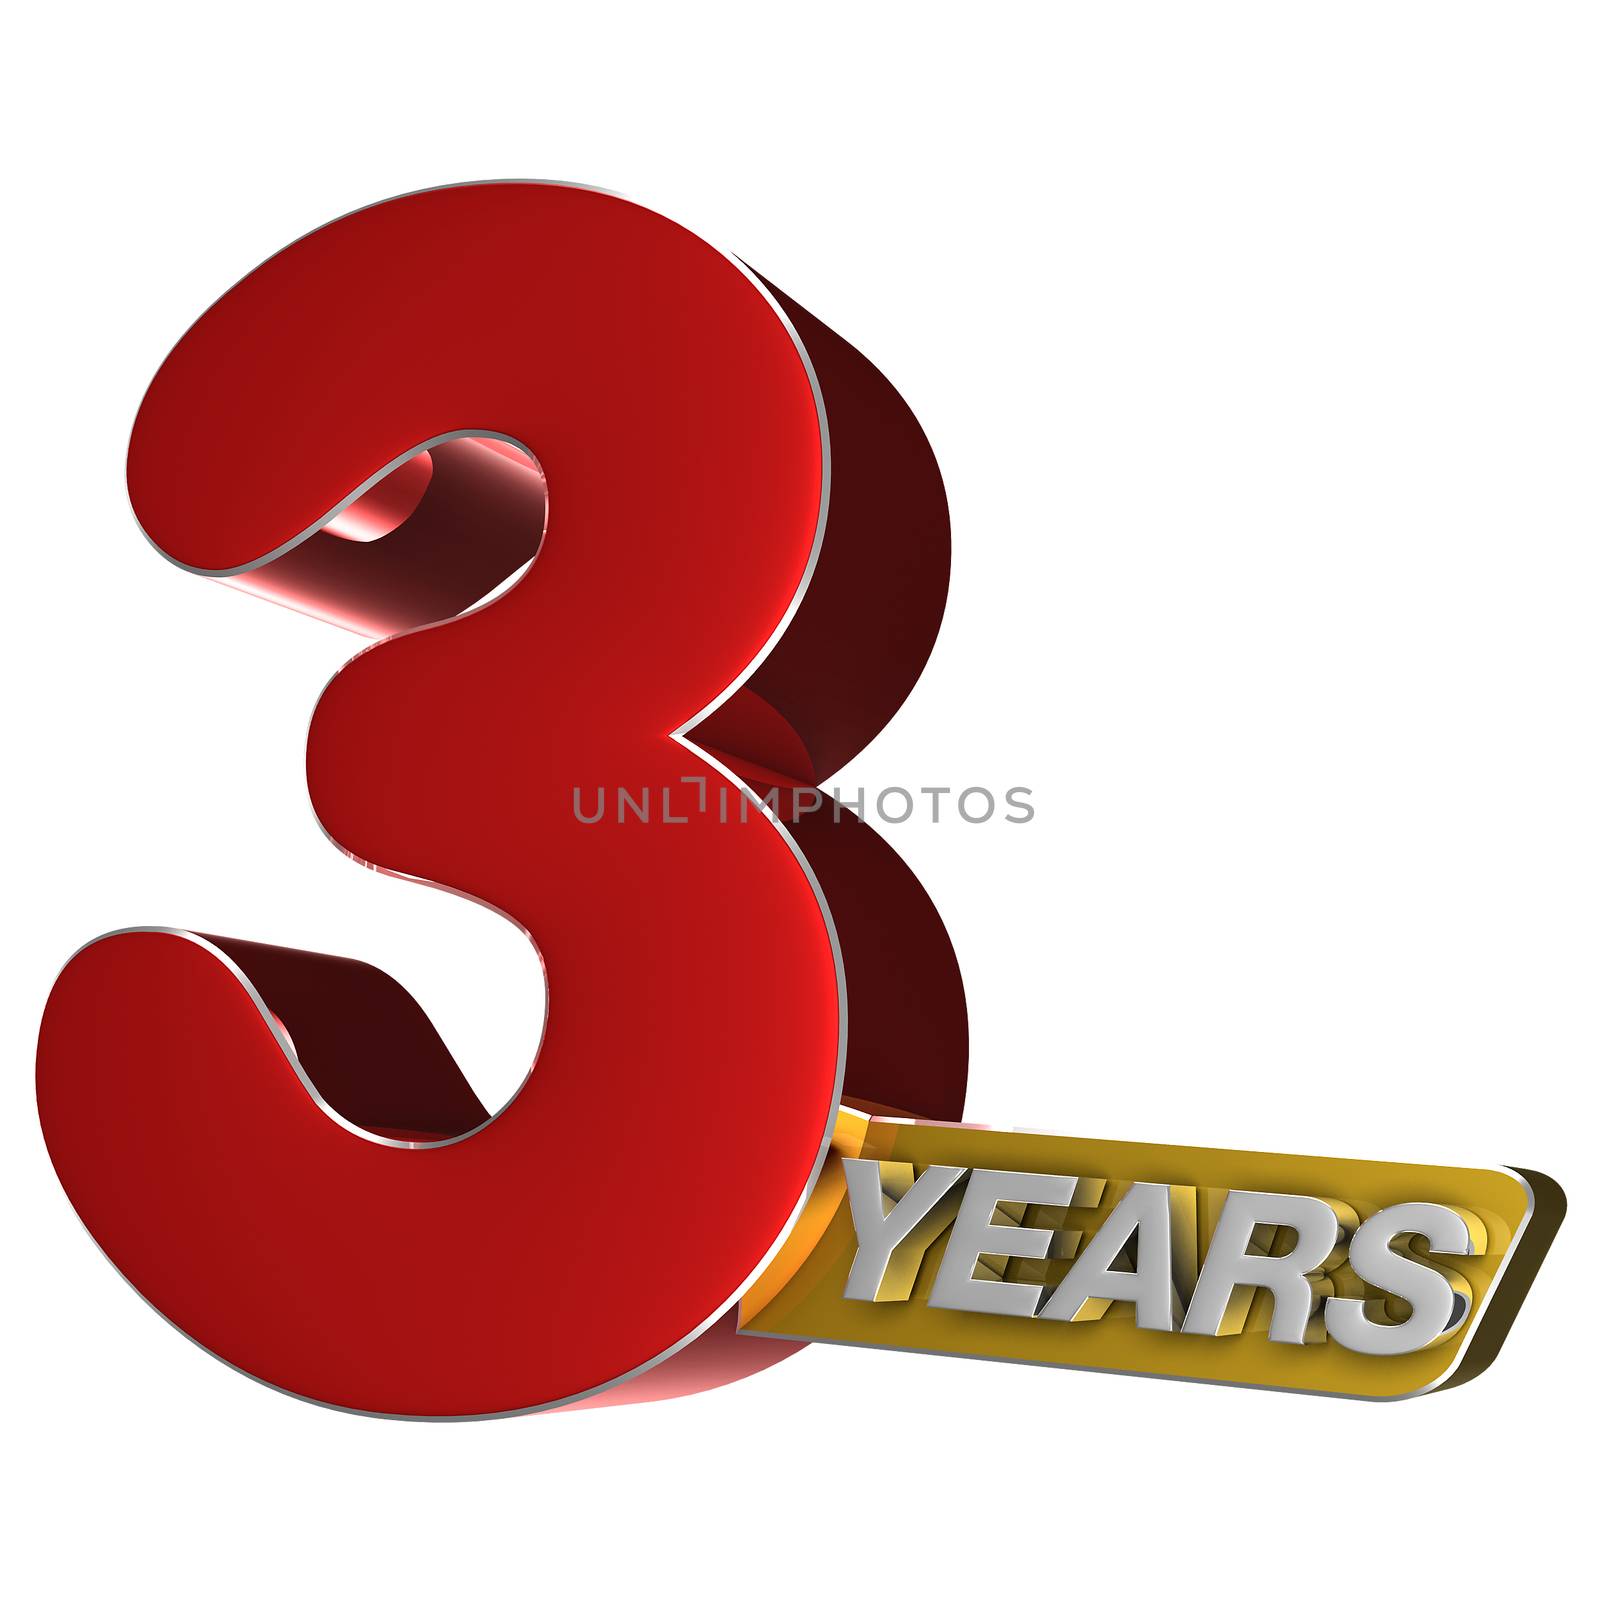 3 years 3D rendering on white background.(with Clipping Path).